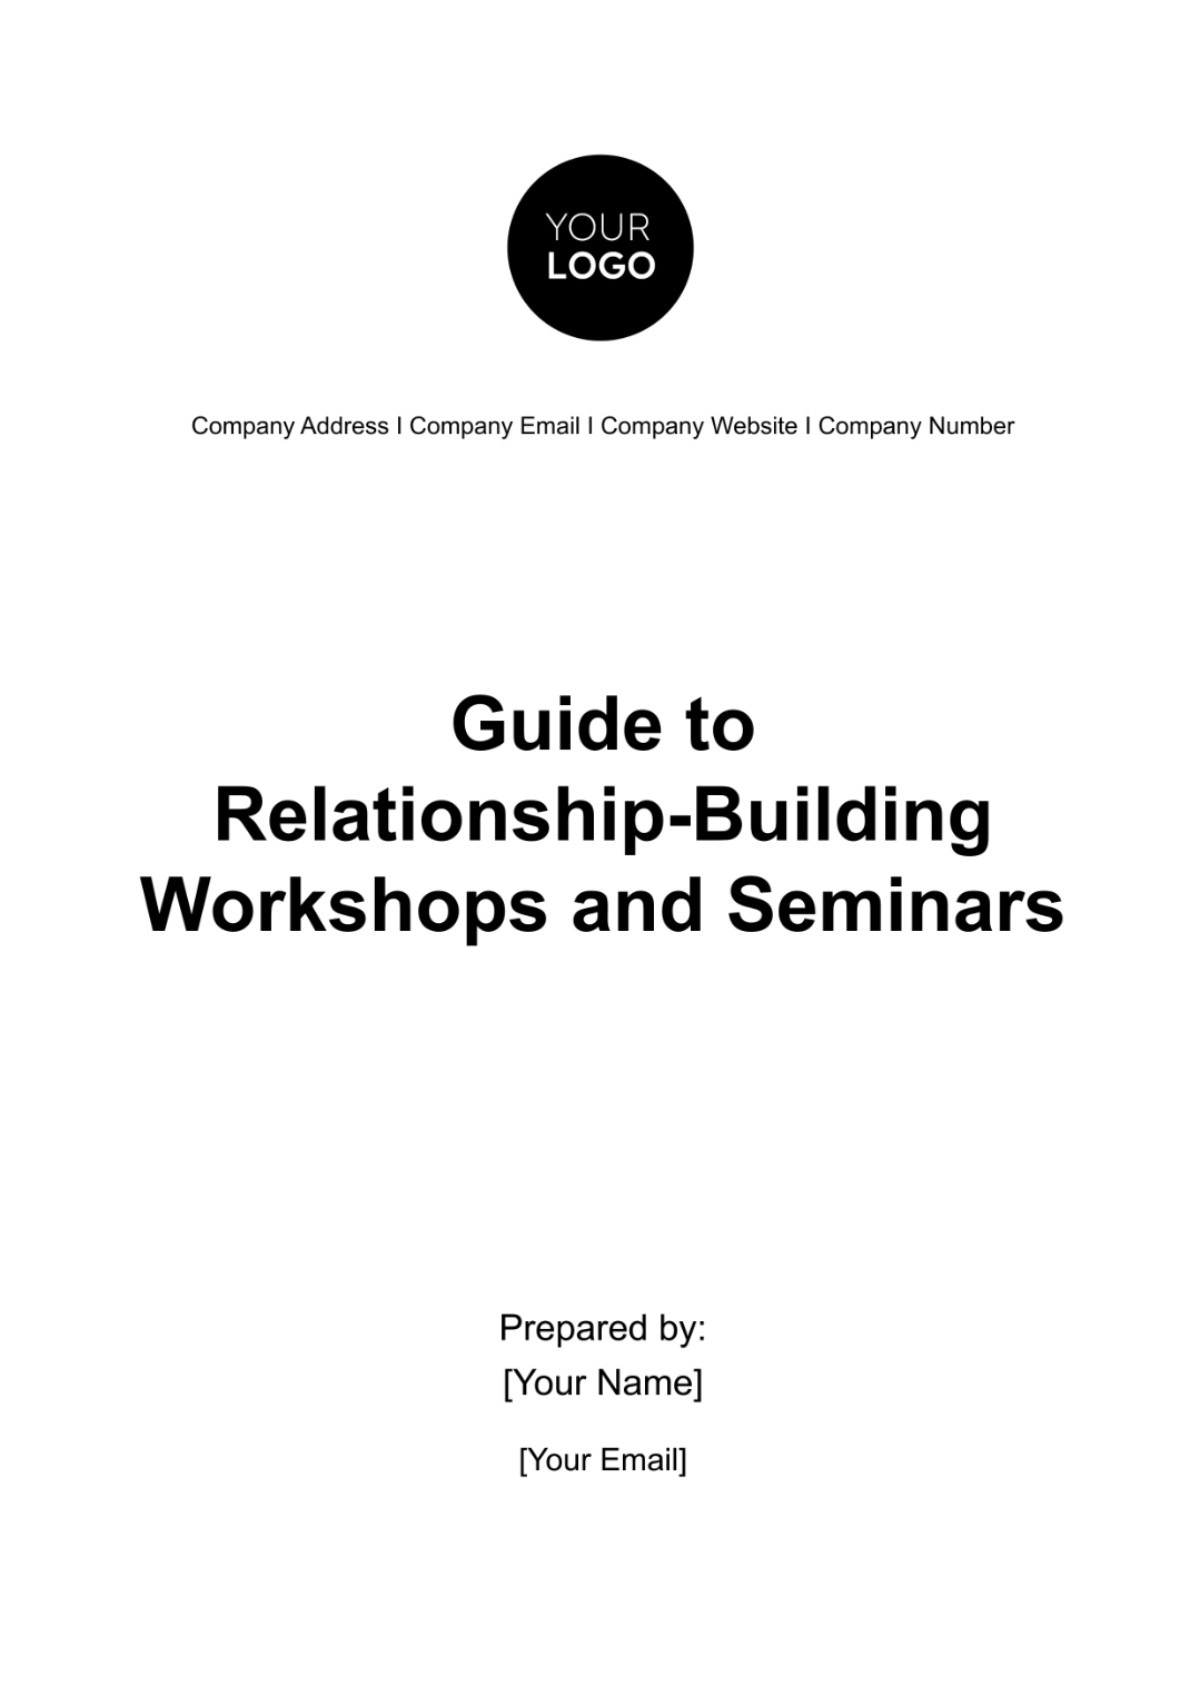 Free Guide to Relationship-building Workshops and Seminars HR Template